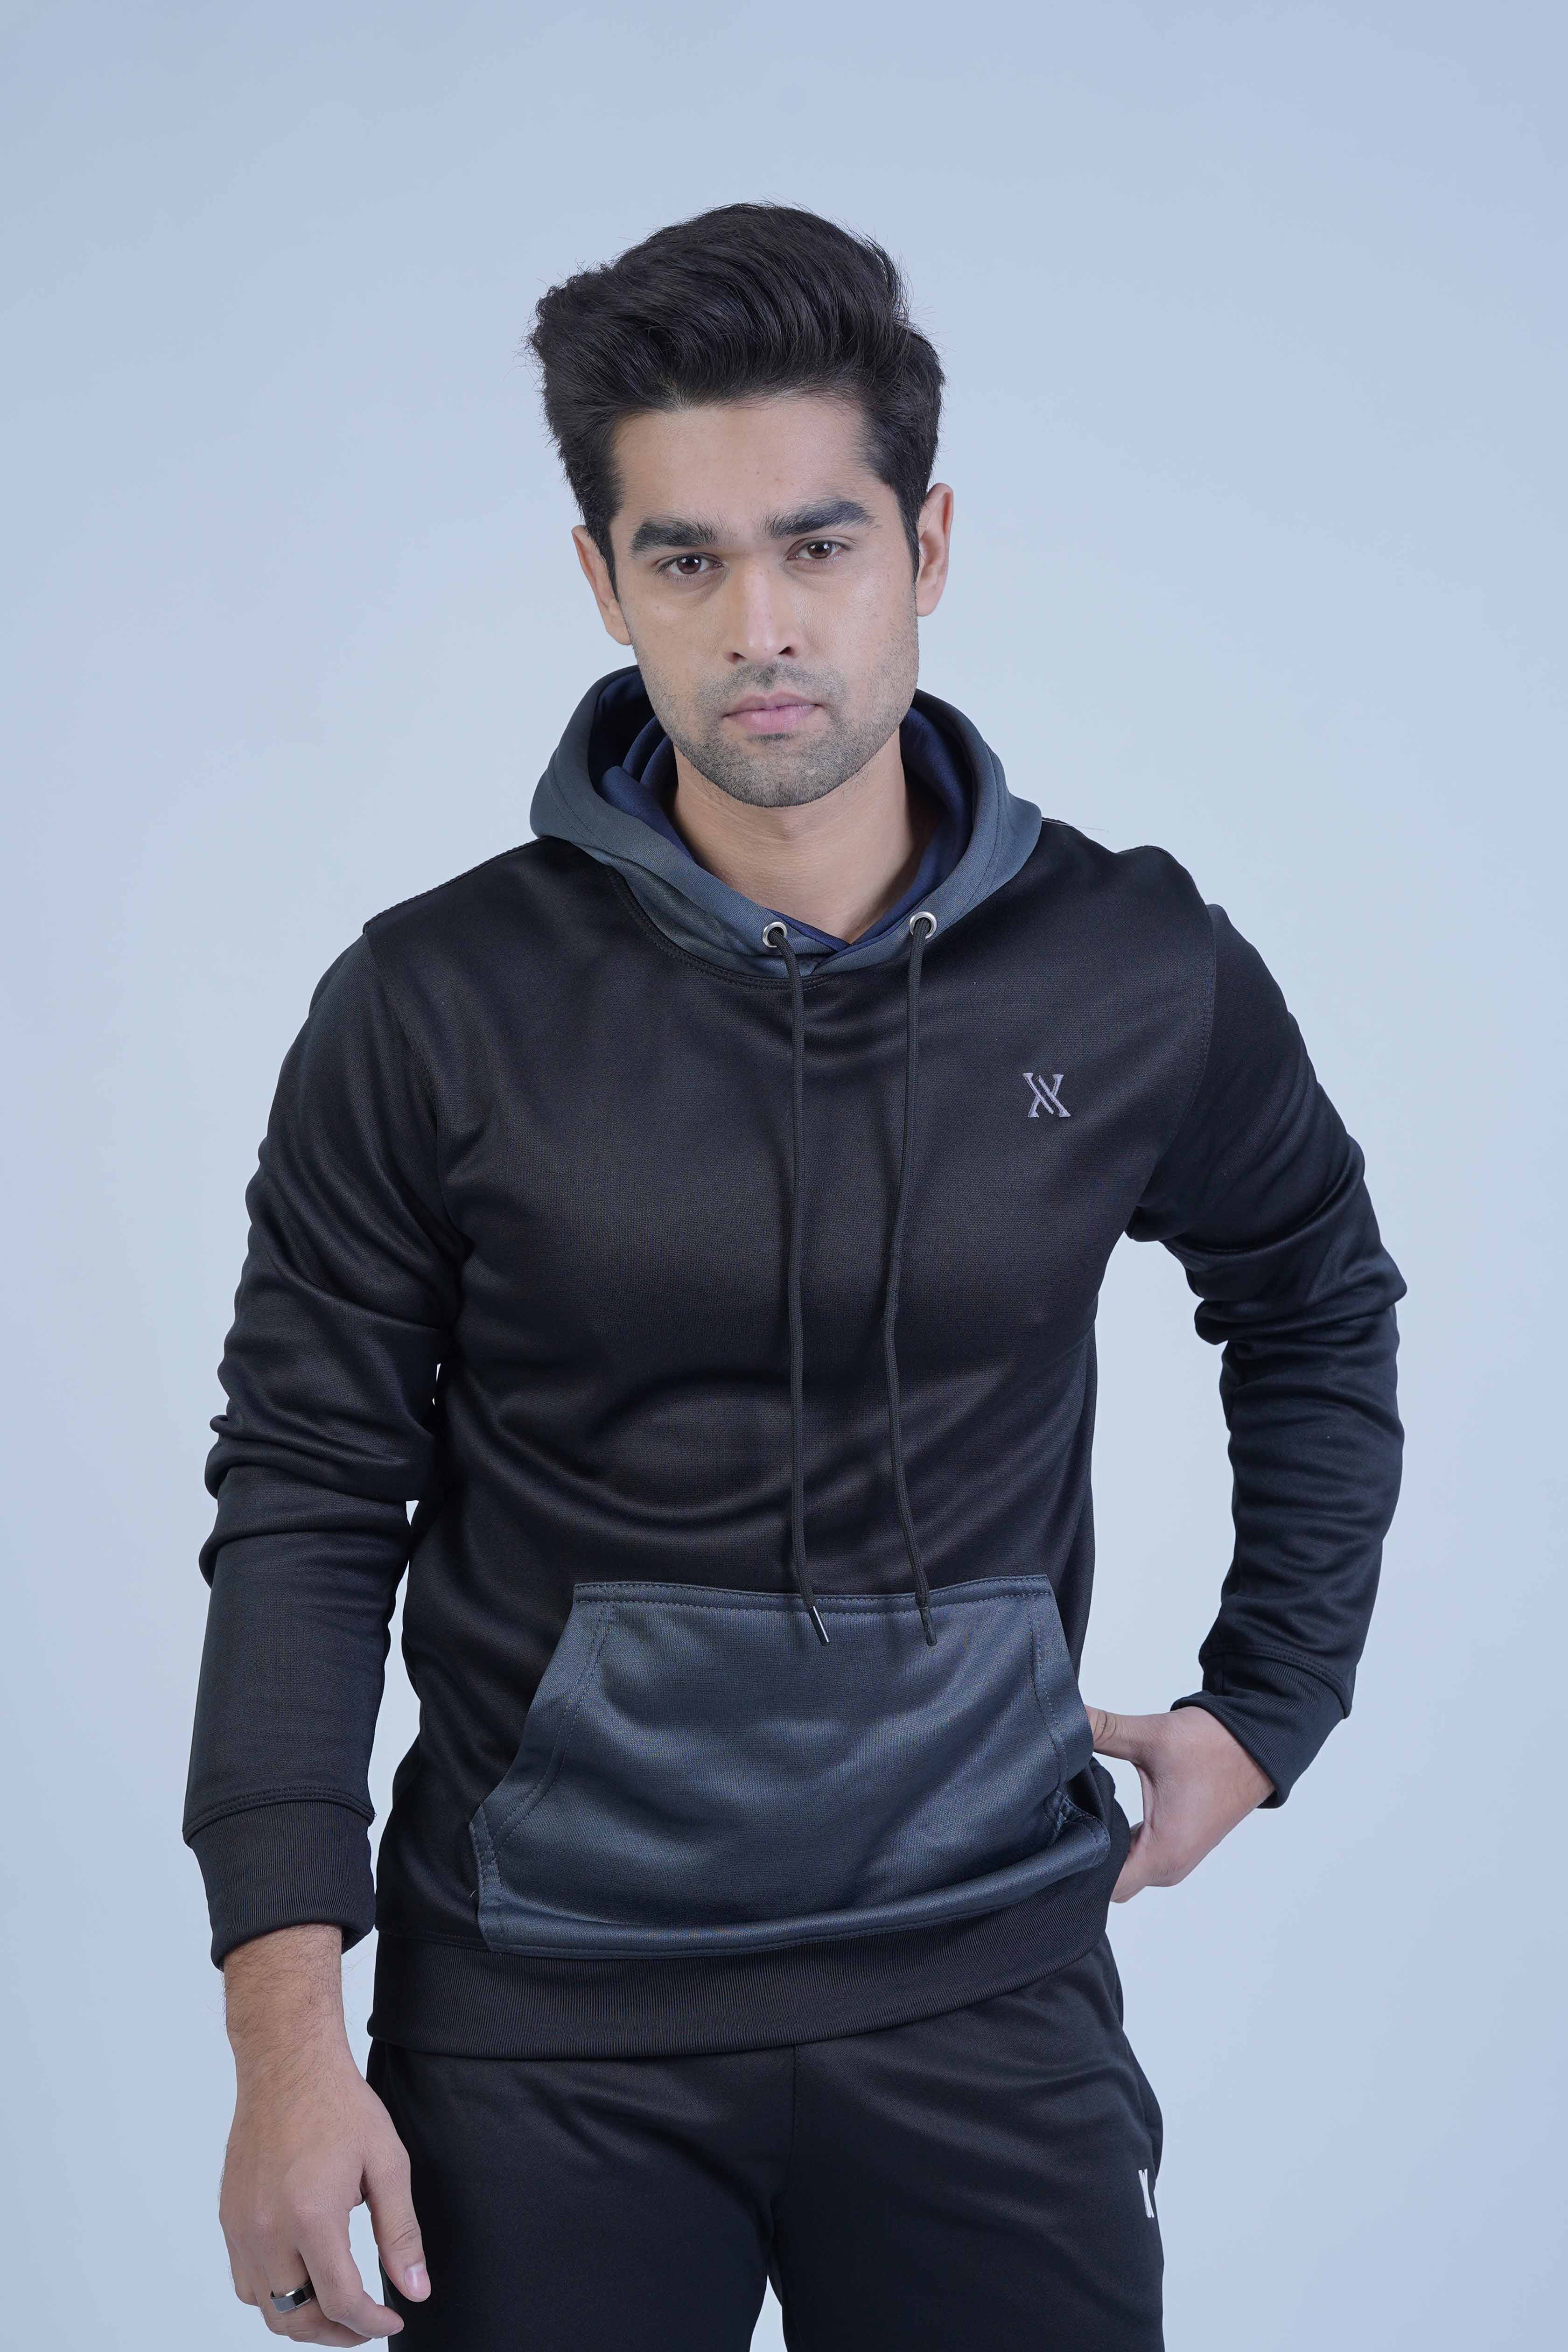 Relaxed Black Hoodie for Casual Comfort